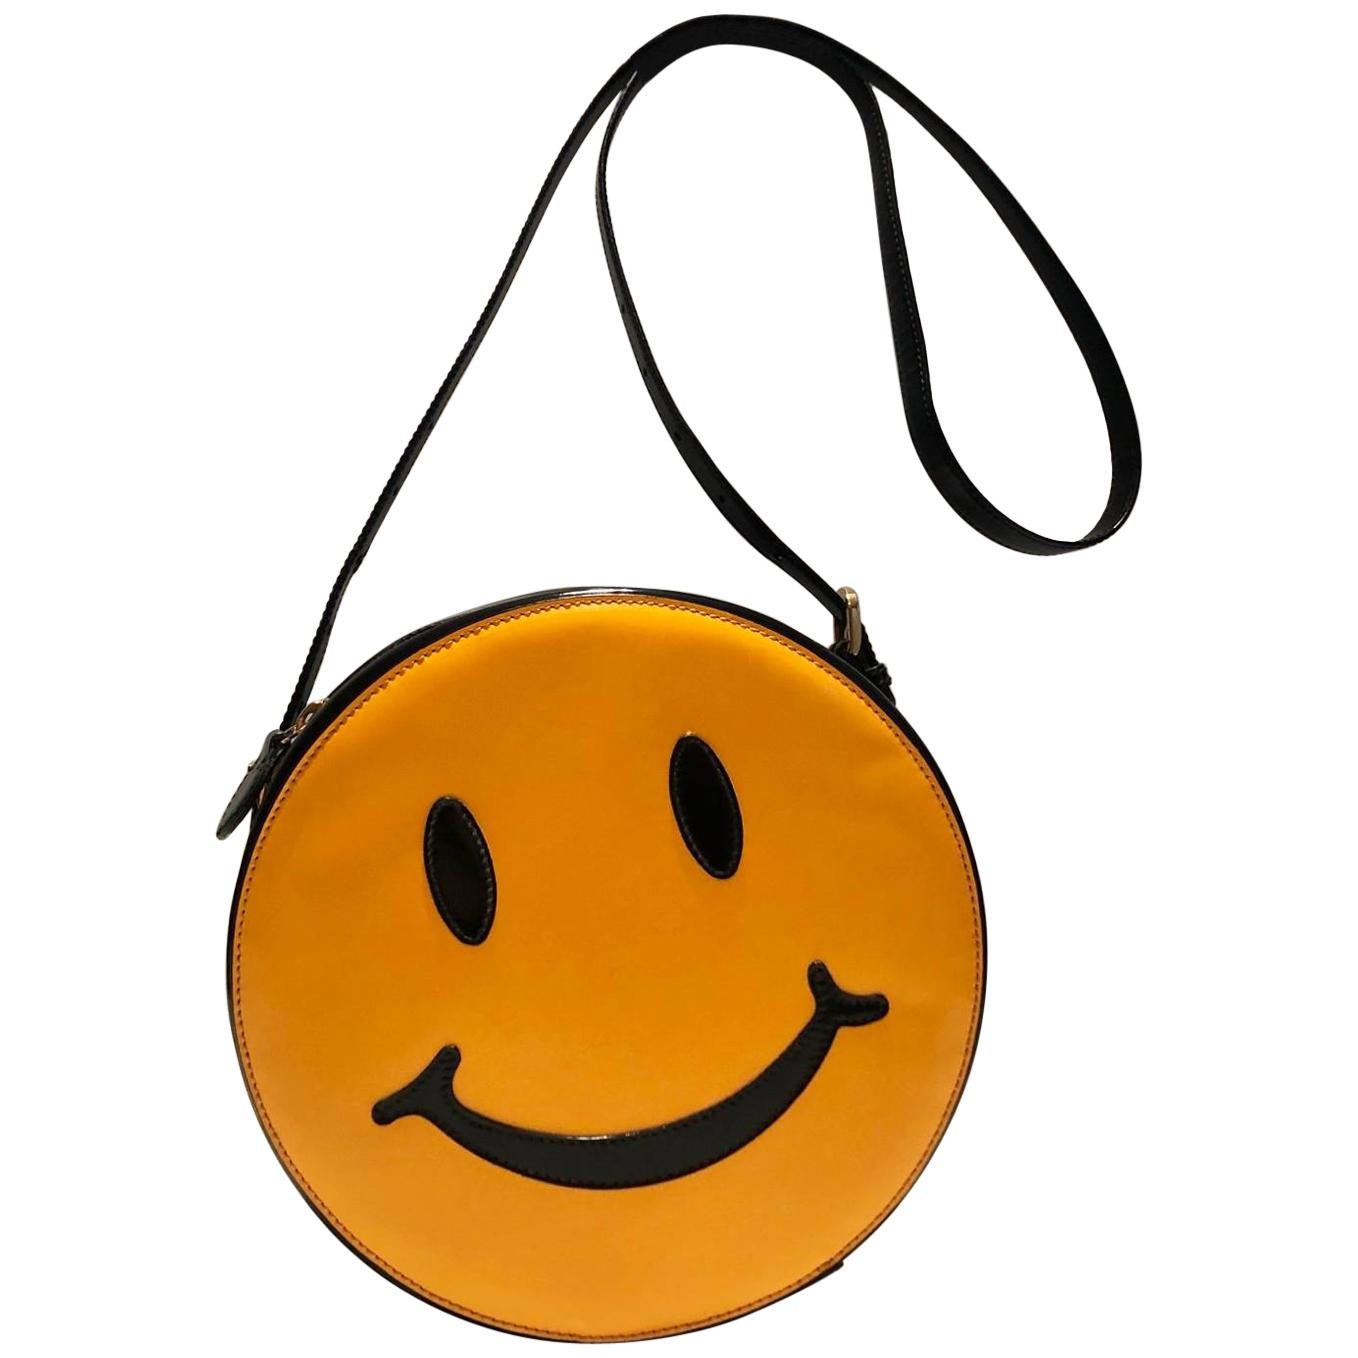 SMILEY FACE PURSE – MISS APRIL FASHION GIRL